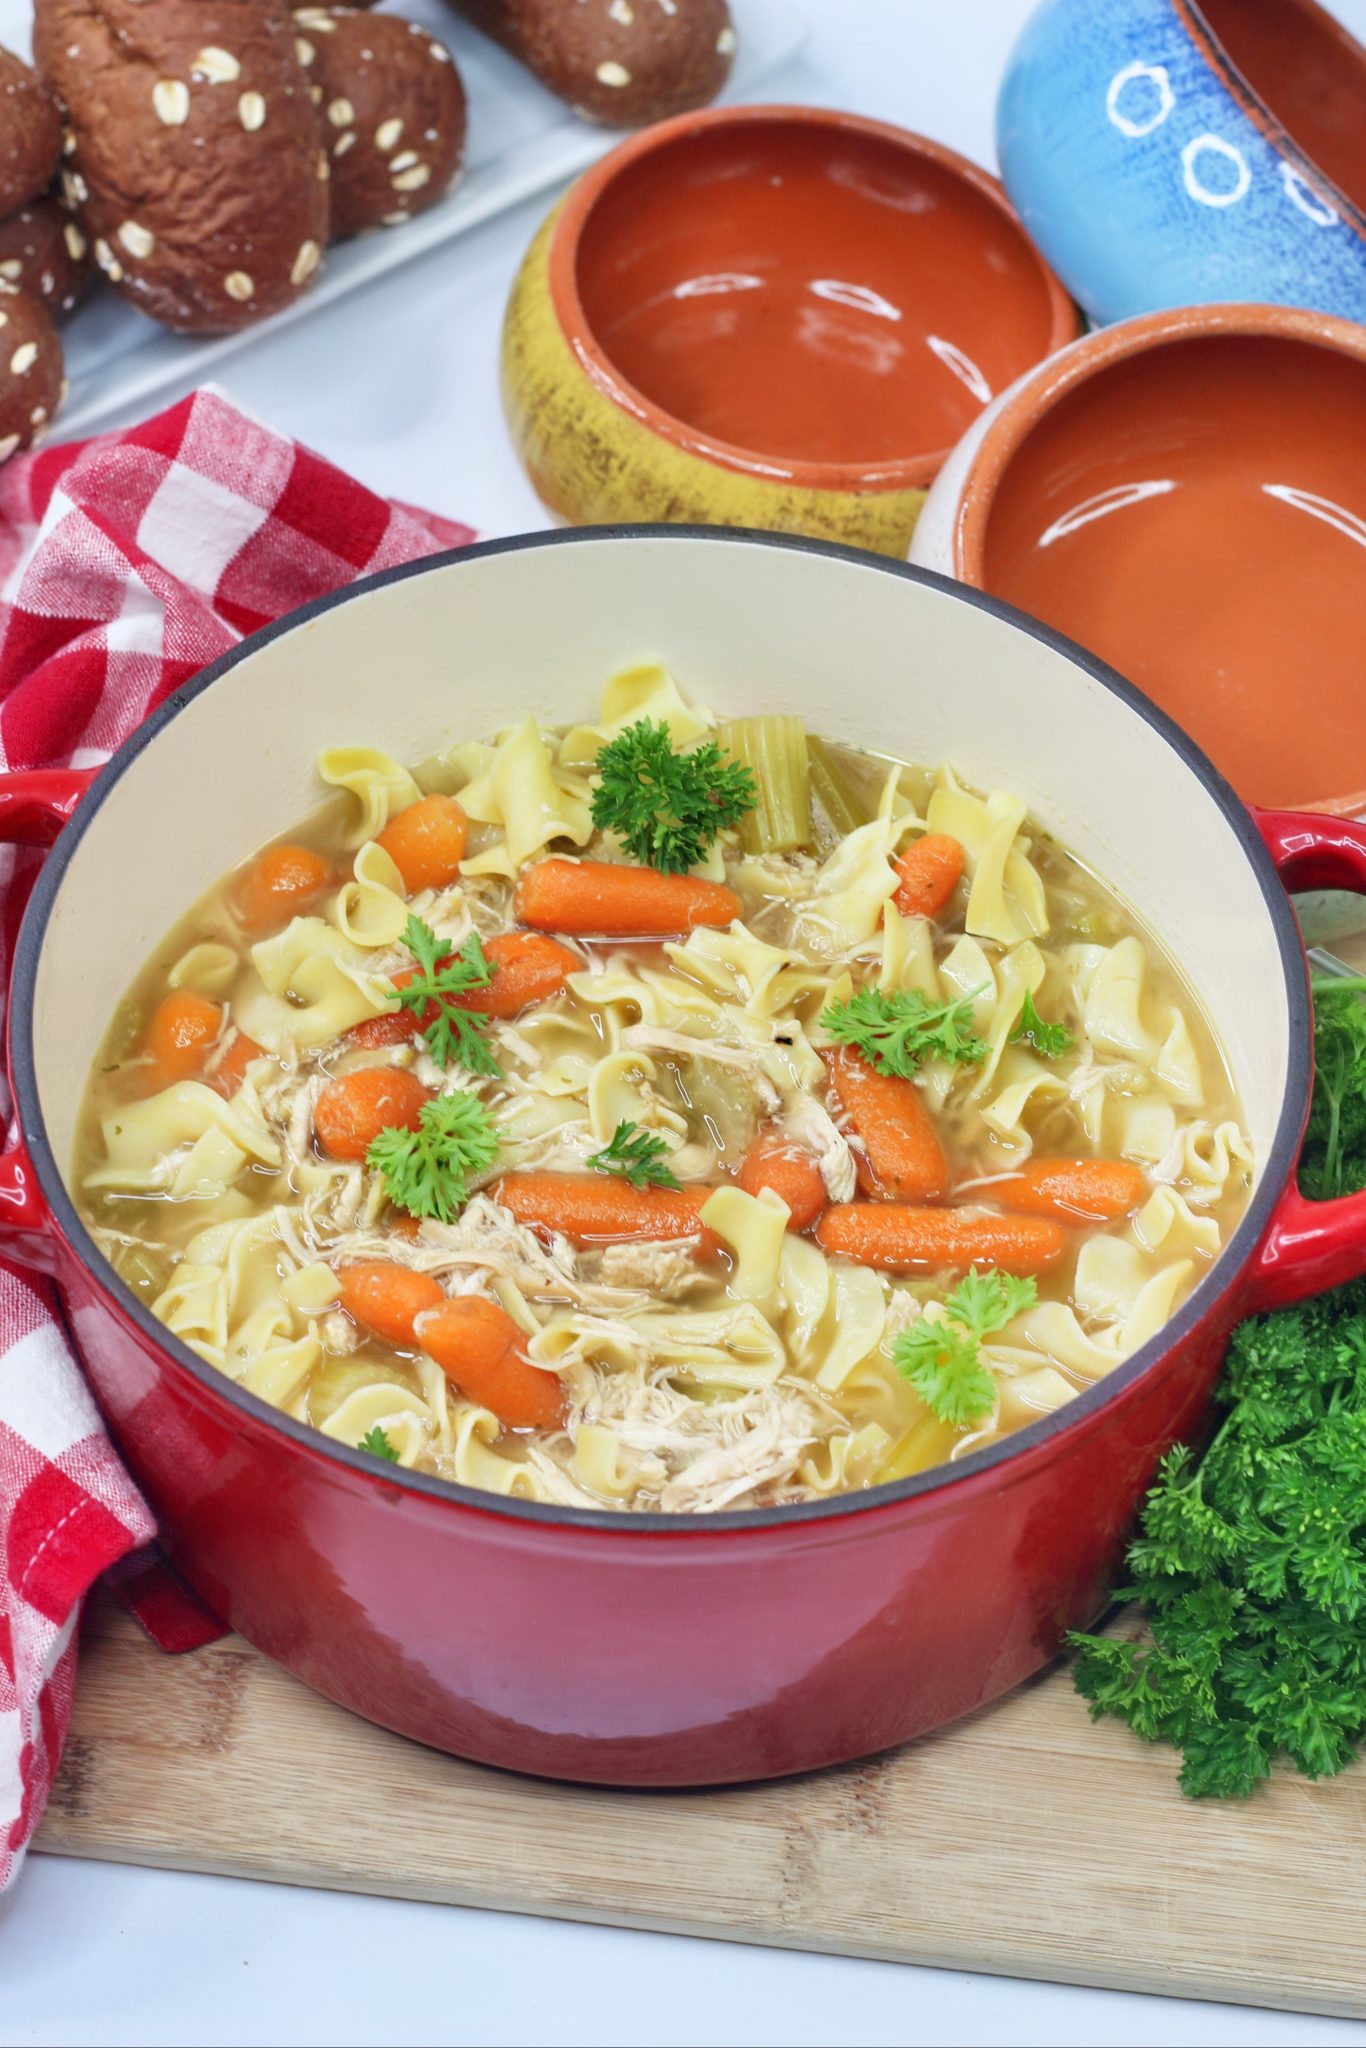 Homestyle Chicken Noodle Soup 4 1 1366x2048 